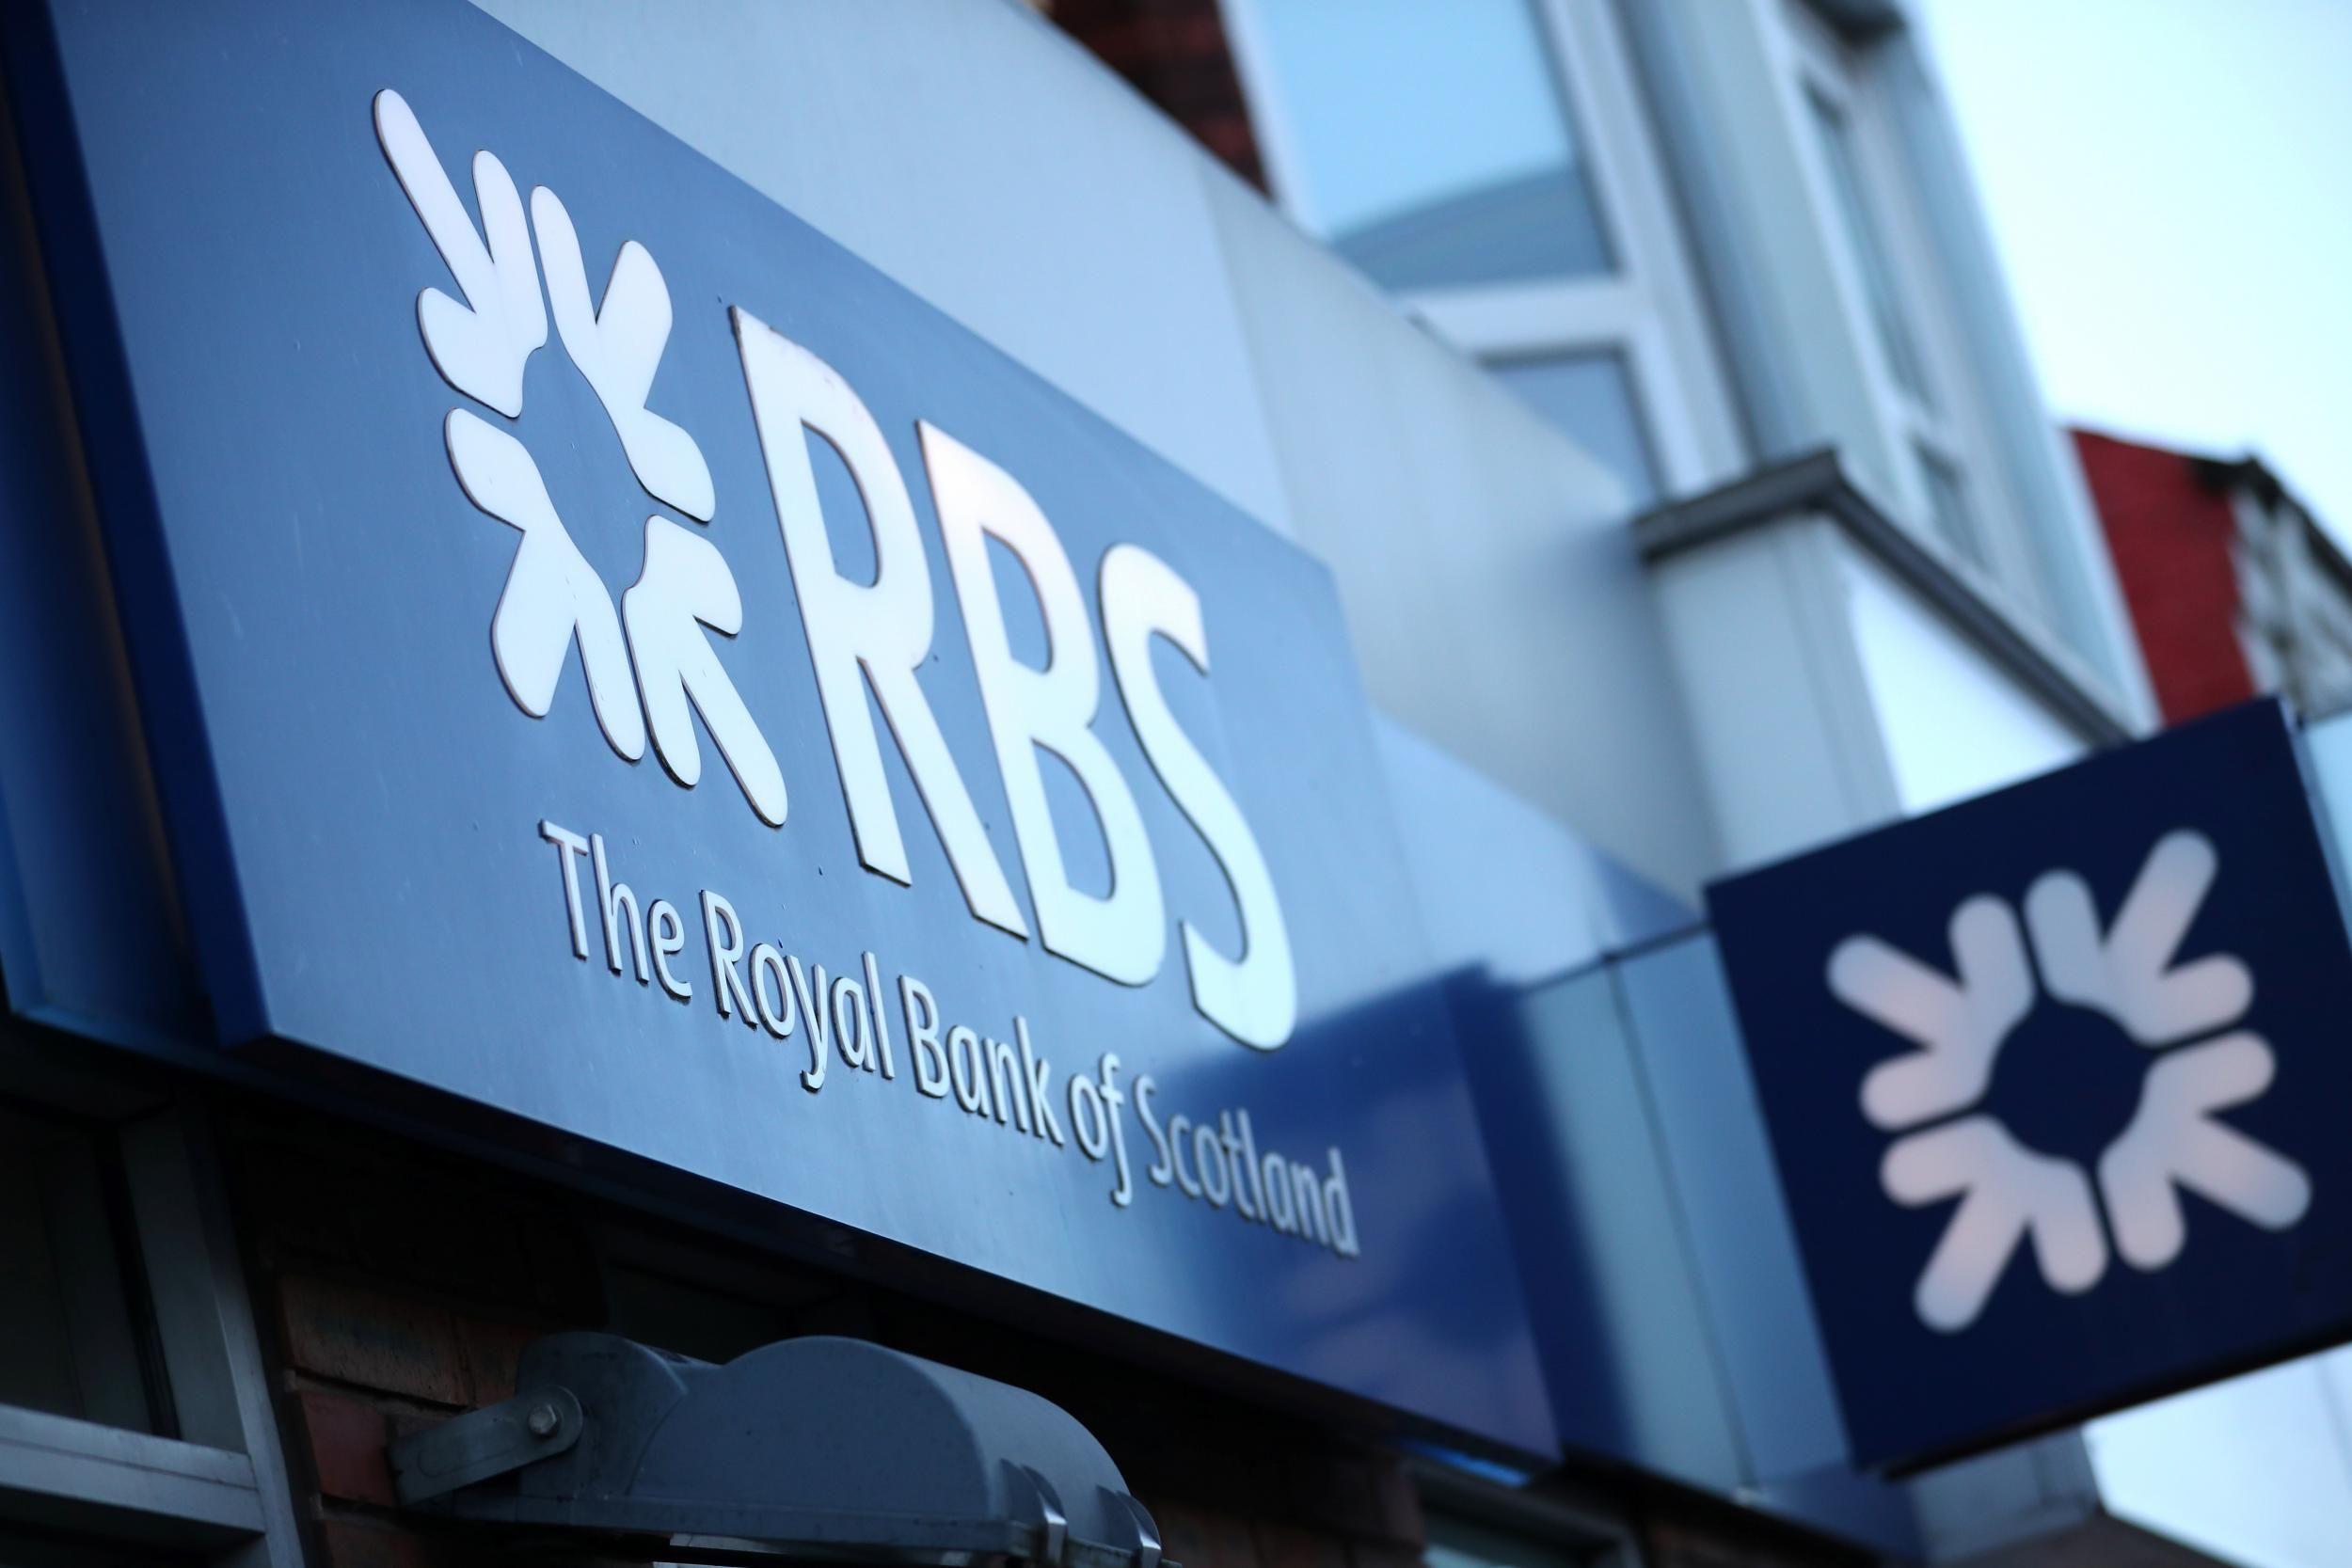 Royalbankofscotland Logo - Royal Bank Of Scotland news, breaking stories and comment